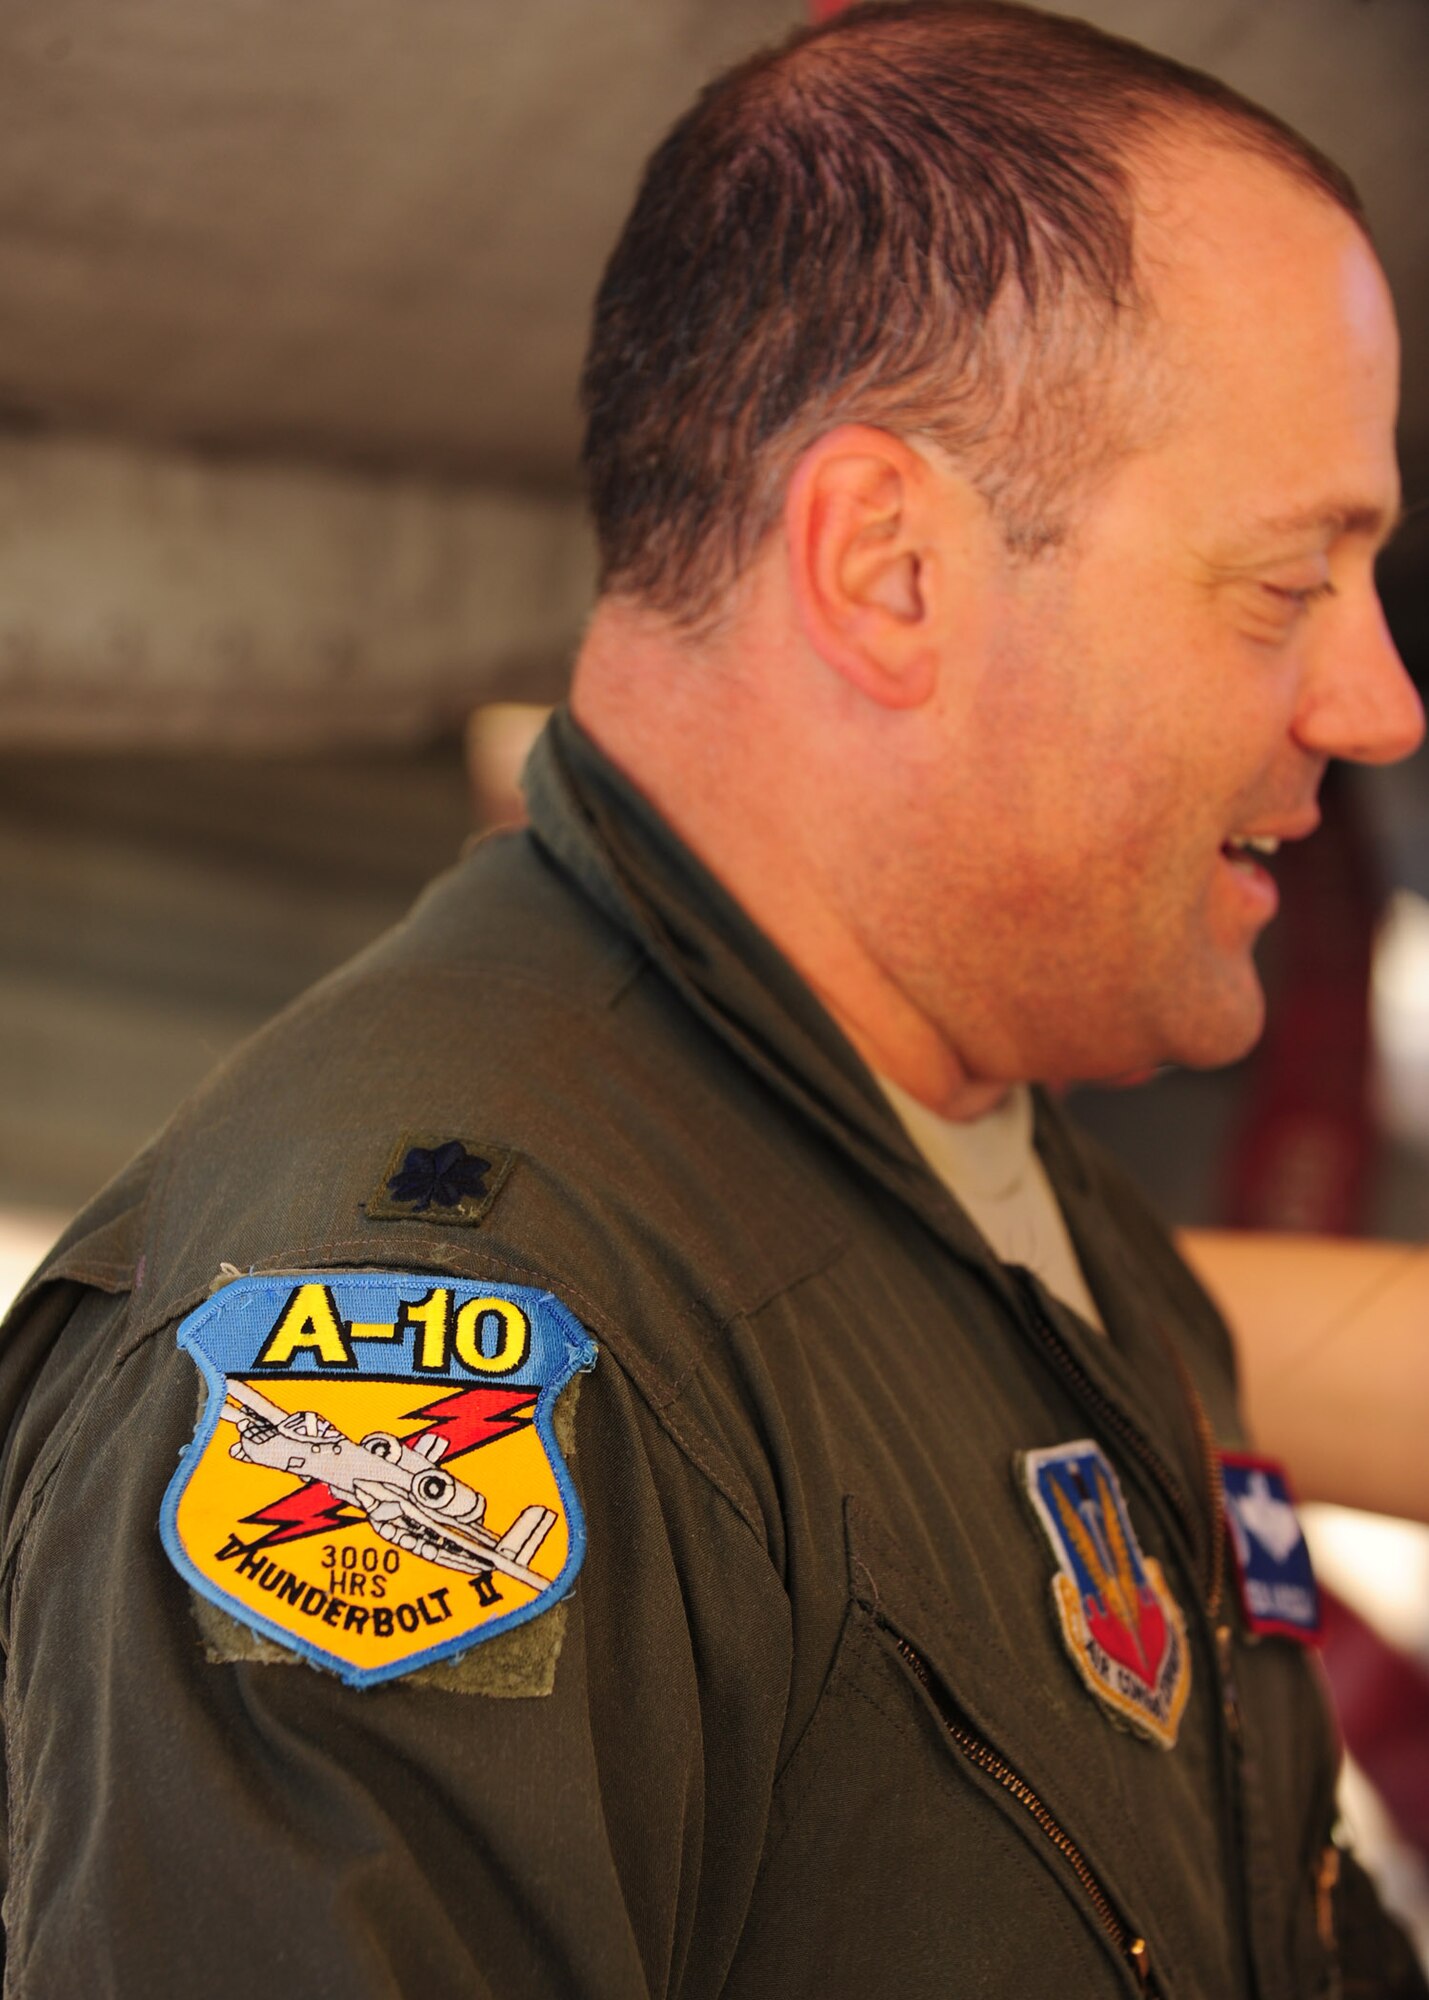 DAVIS-MONTHAN AIR FORCE BASE, Ariz. - Lt. Col. Andrew Kapuscak, pilot and commander of the 355th Training Squadron, returns from a sortie sporting a special patch on his uniform on the flight line here April 27. The patch advertises that he has flown 3,000 miles in his career. (U.S. Air Force photo/Airman 1st Class Jerilyn Quintanilla) 